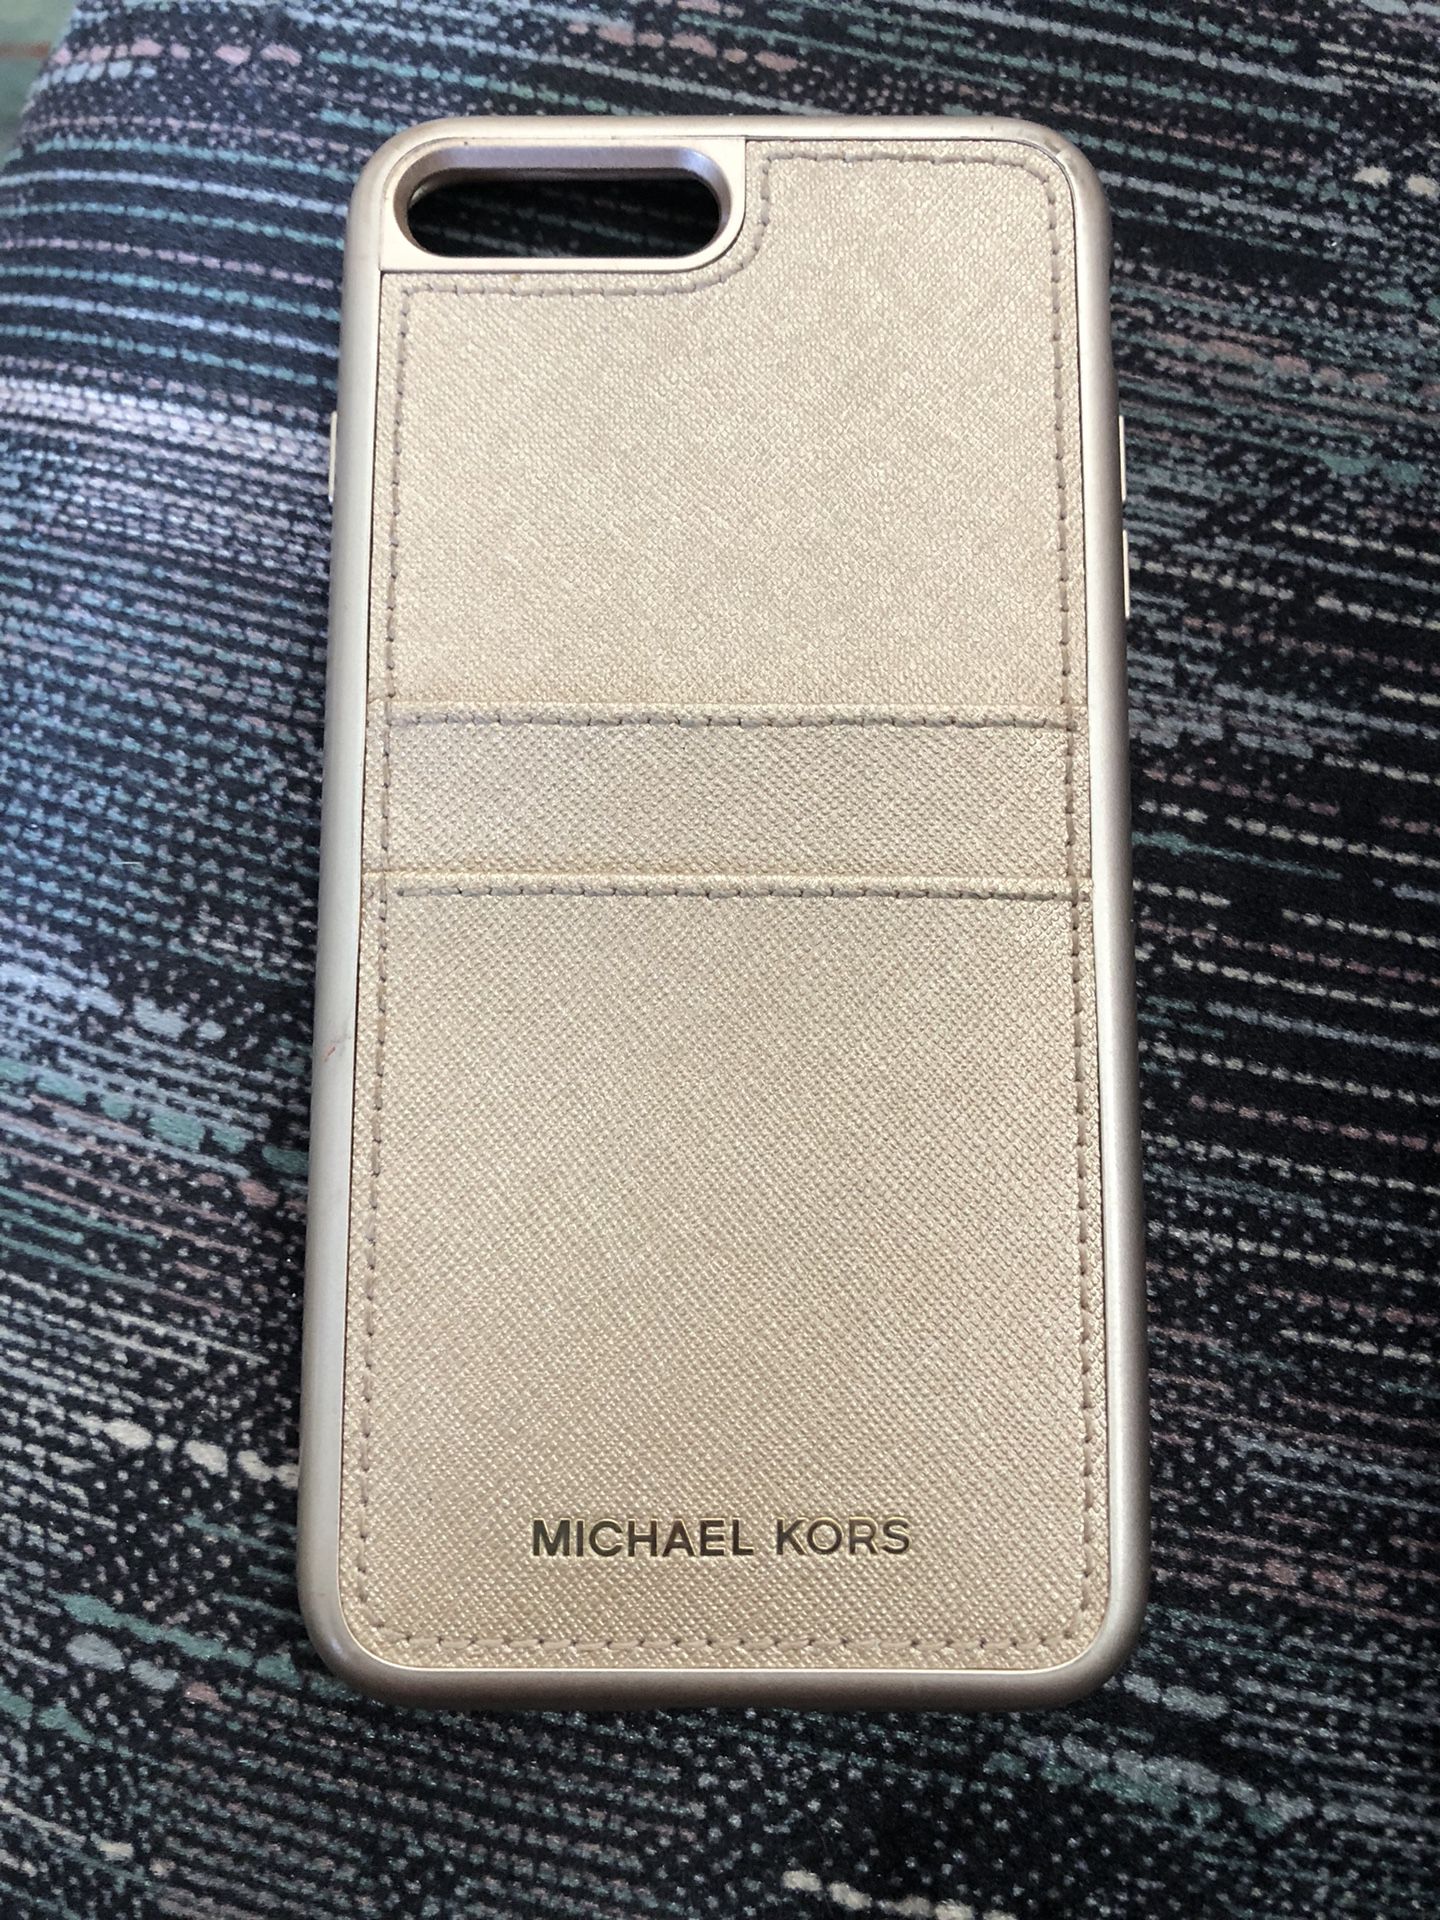 Rose Gold iPhone 7 Michael Kors phone case for Sale in Middletown, OH - OfferUp